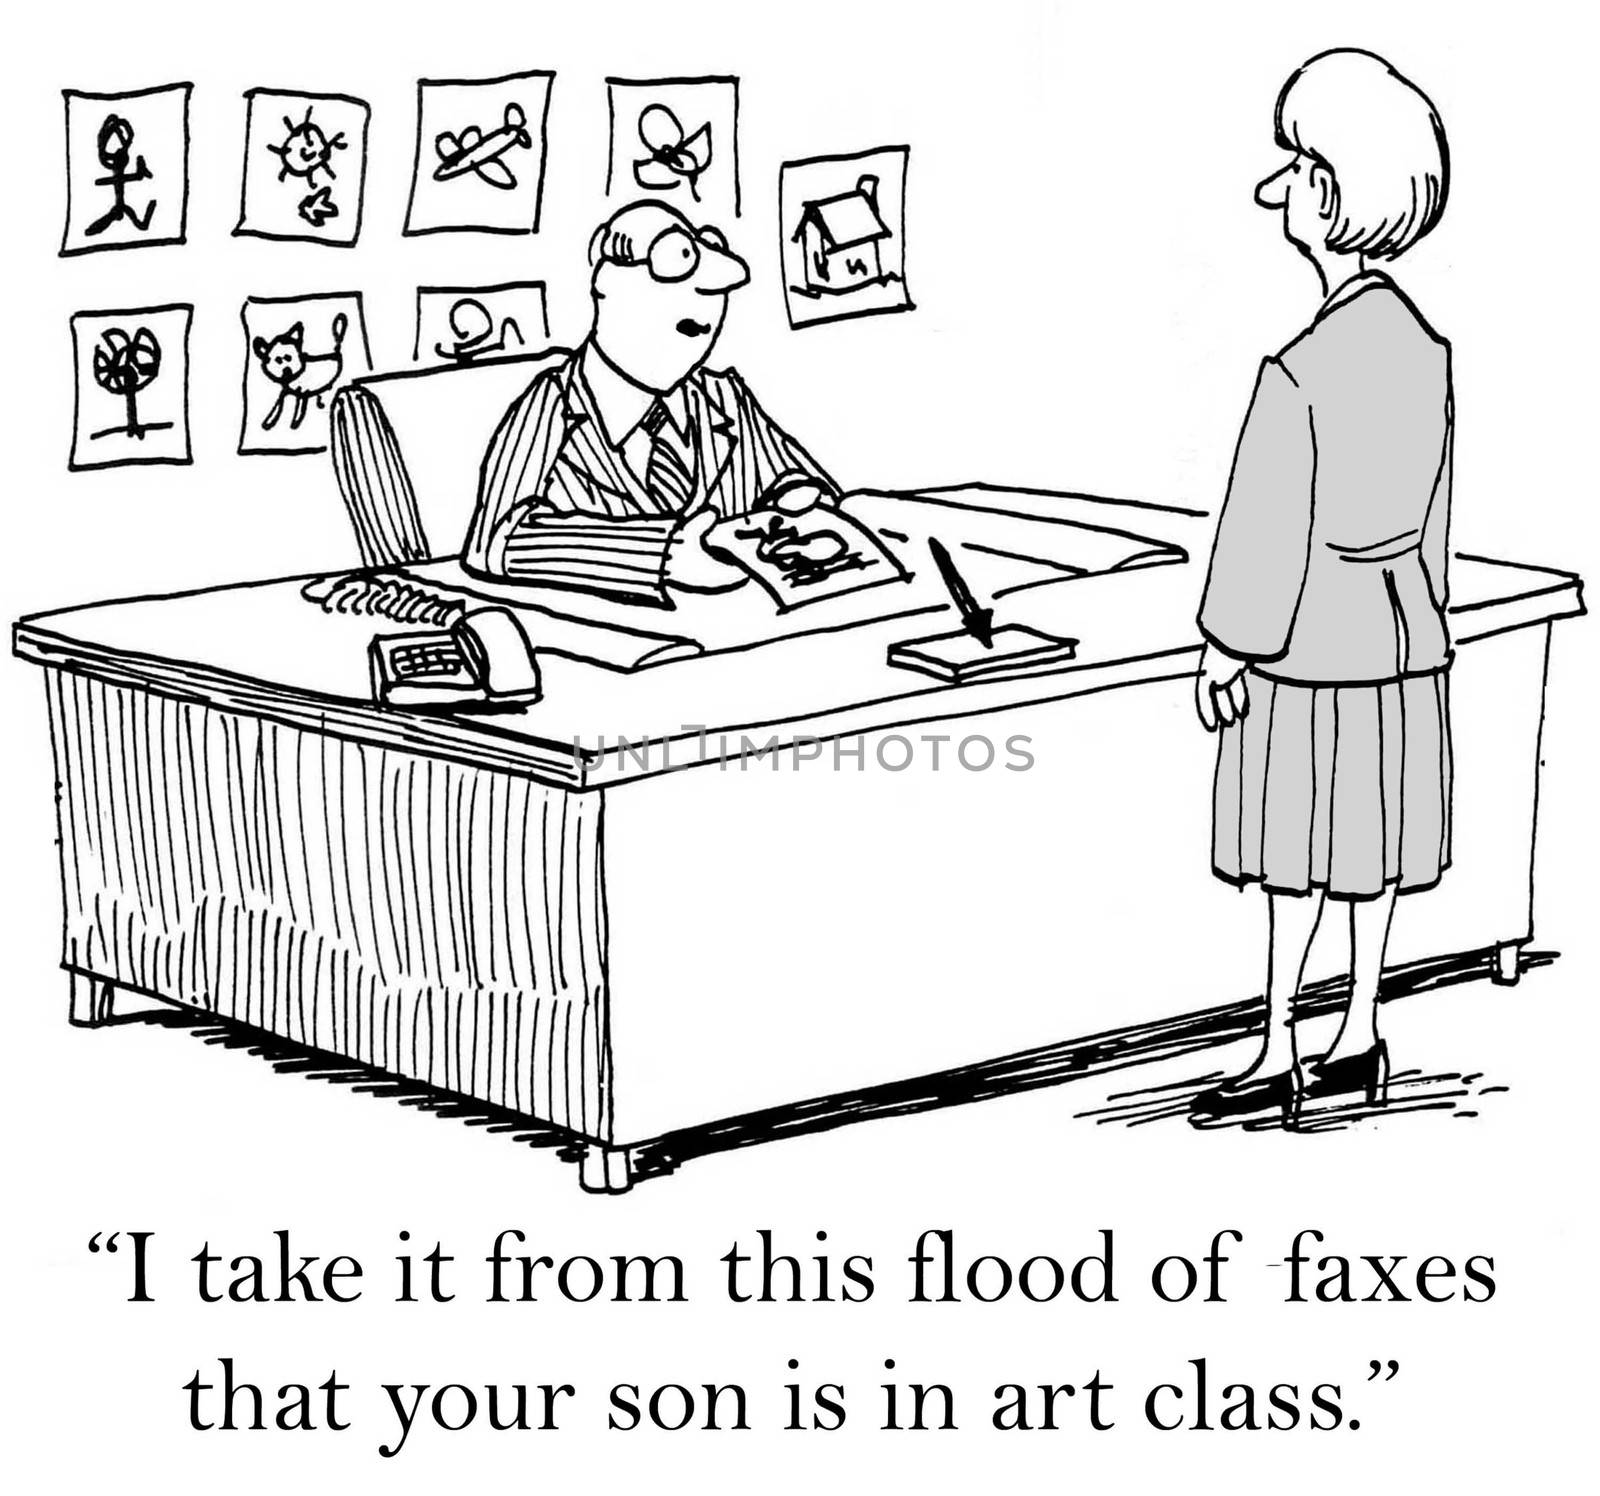 Overly Proud Mother has fax of all drawings by andrewgenn